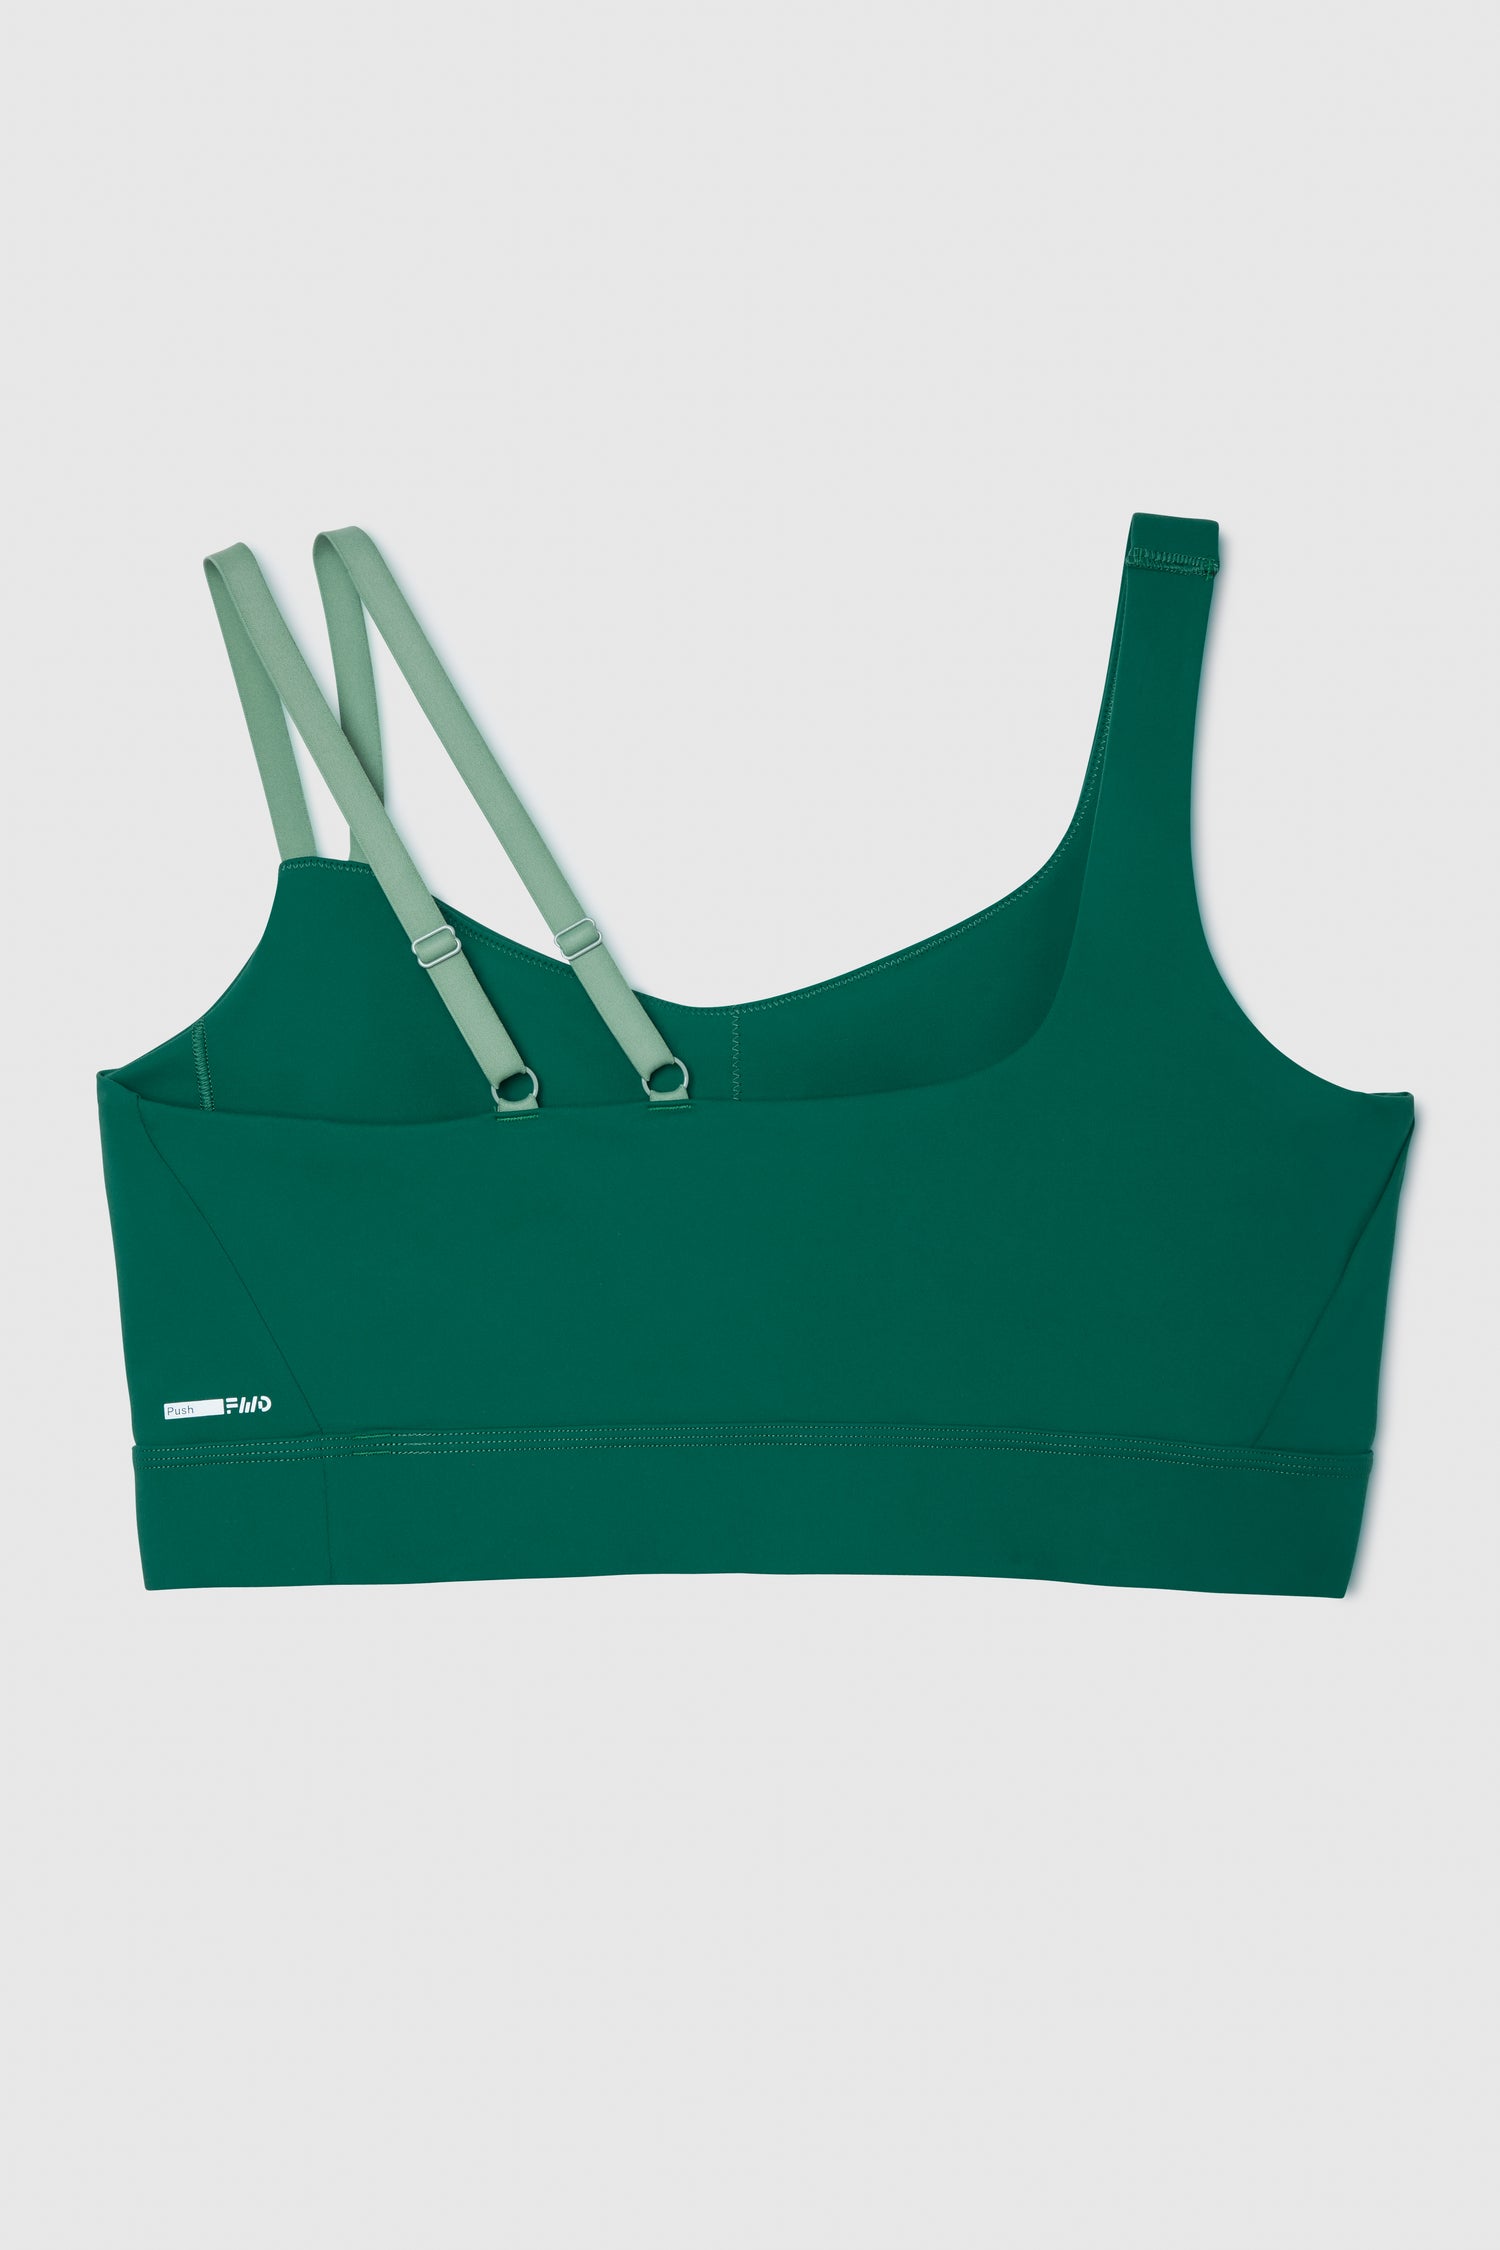 Women's Never Fail Cross Back Fitted Green Sports Bra Workout Fitness Gym  V112